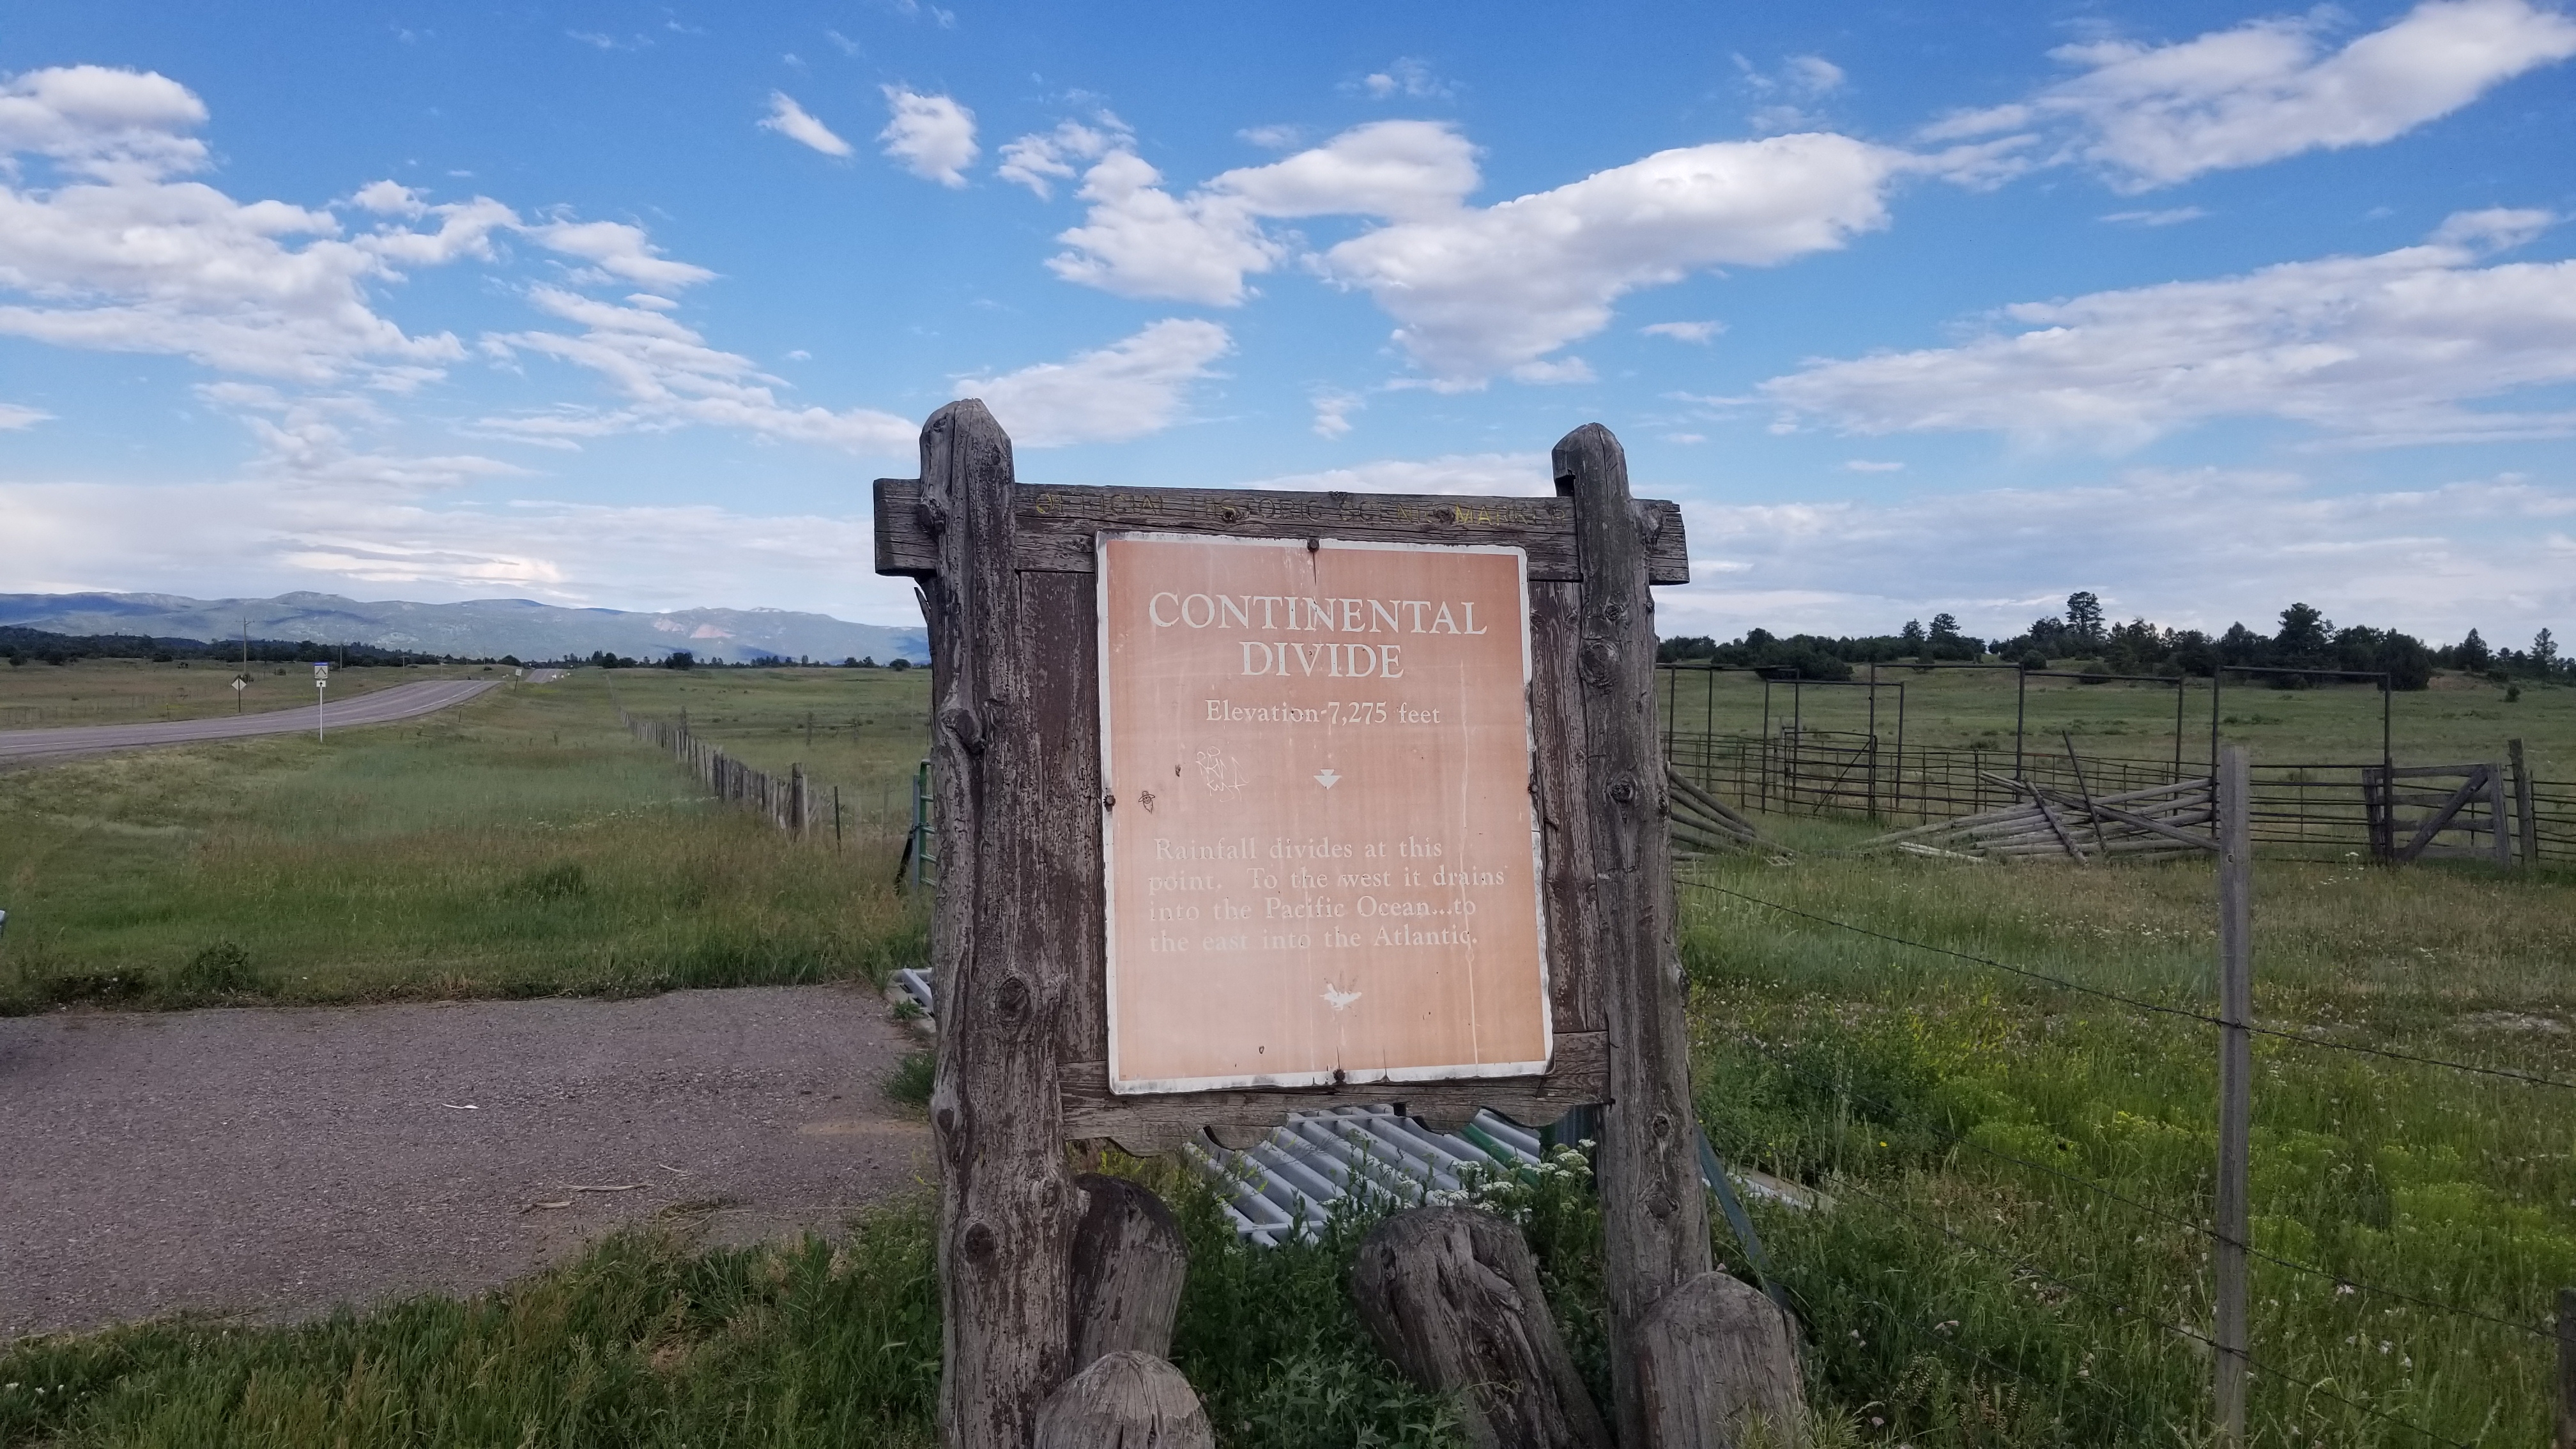 Looking toward the east of the Continental Divide Marker